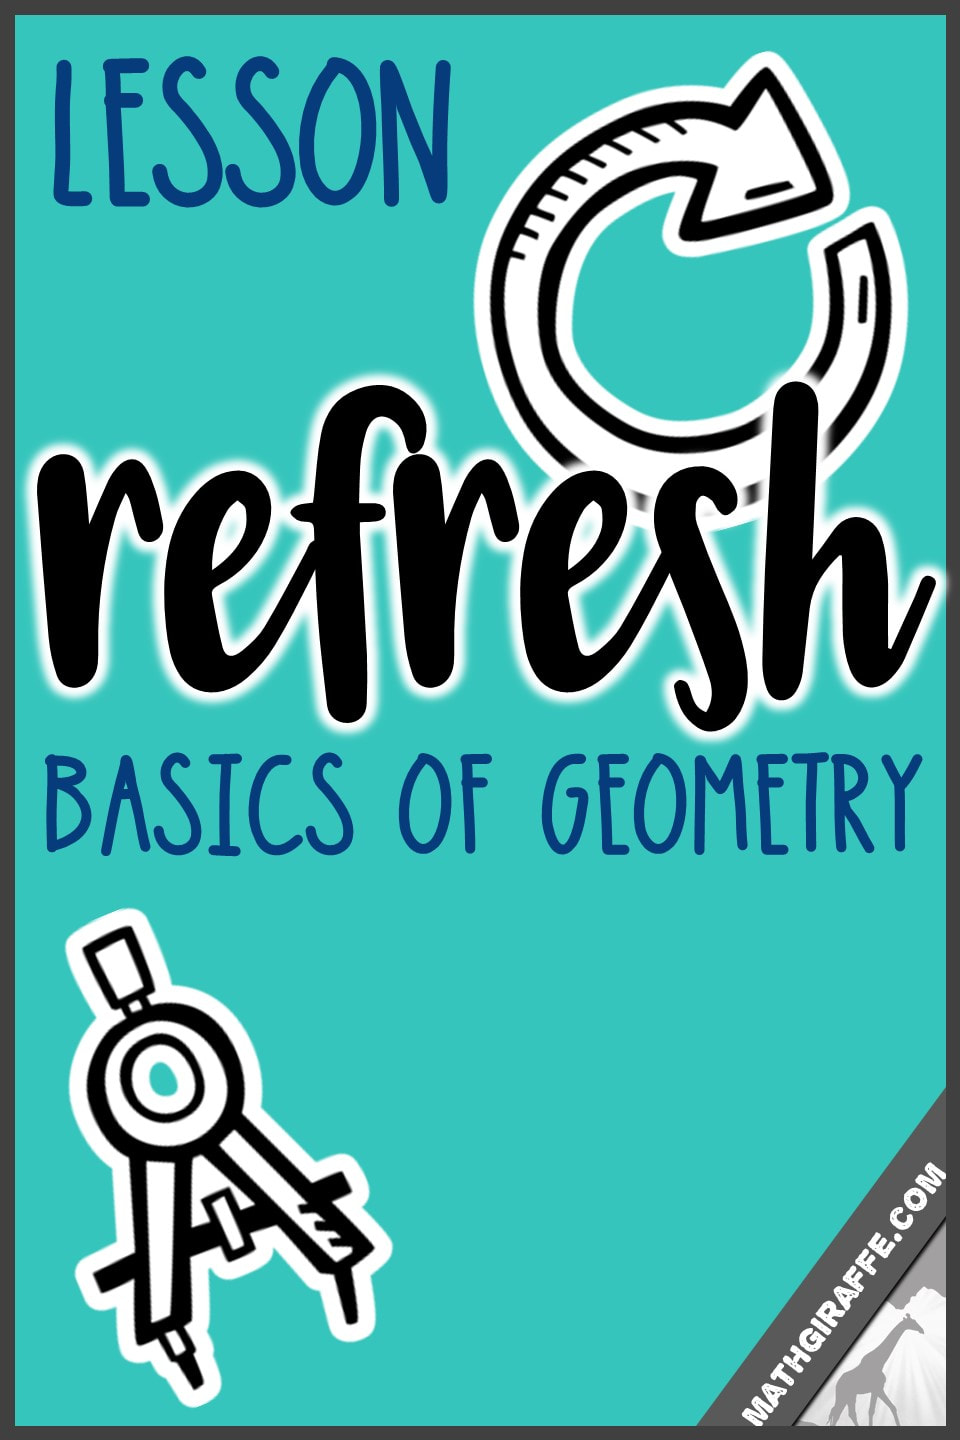 Refresh your lesson! New ways to teach points, lines, and planes... Spicing up Geometry axioms